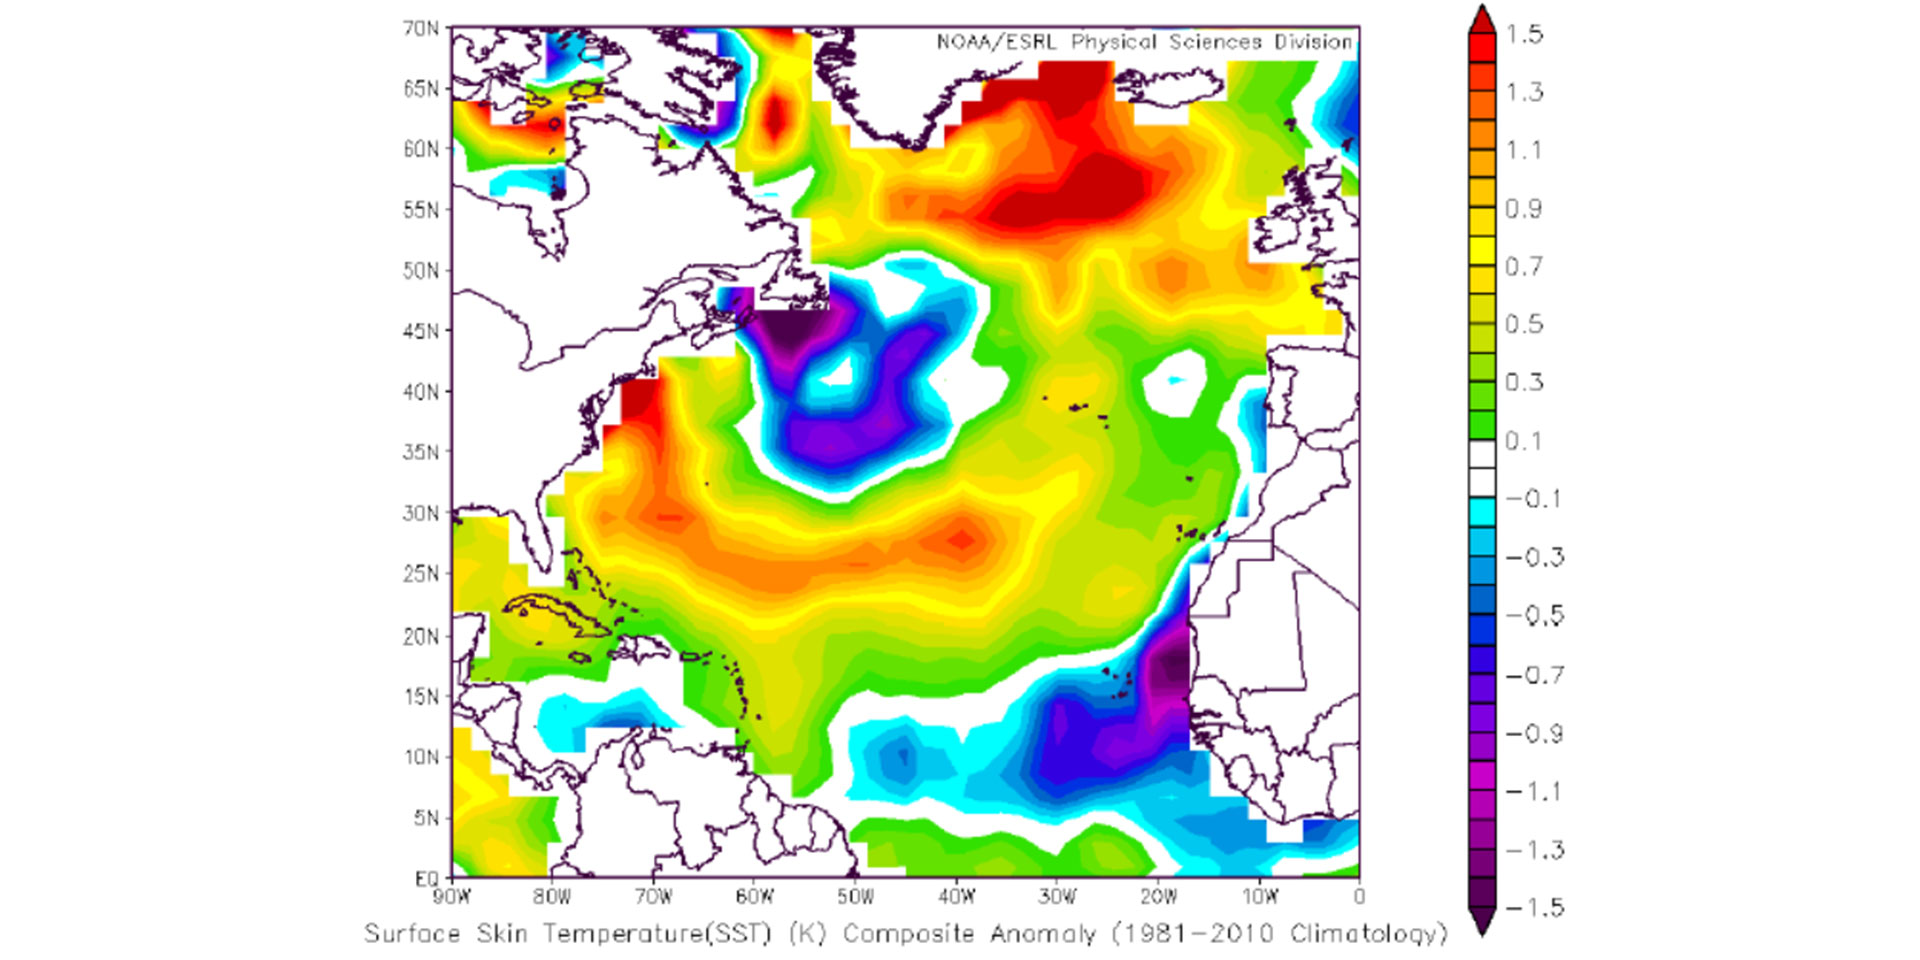 The image show the deviation of the current SST’s (Sea Surface Temperatures) from long-term climatology. It can be seen that a large area off the east coast of Africa shows significantly lower temperatures compared to the longer-term average. The Caribbean Sea and Gulf of Mexico show slightly higher-than-average temperatures but still significantly below temperatures observed, for example, in 2017.